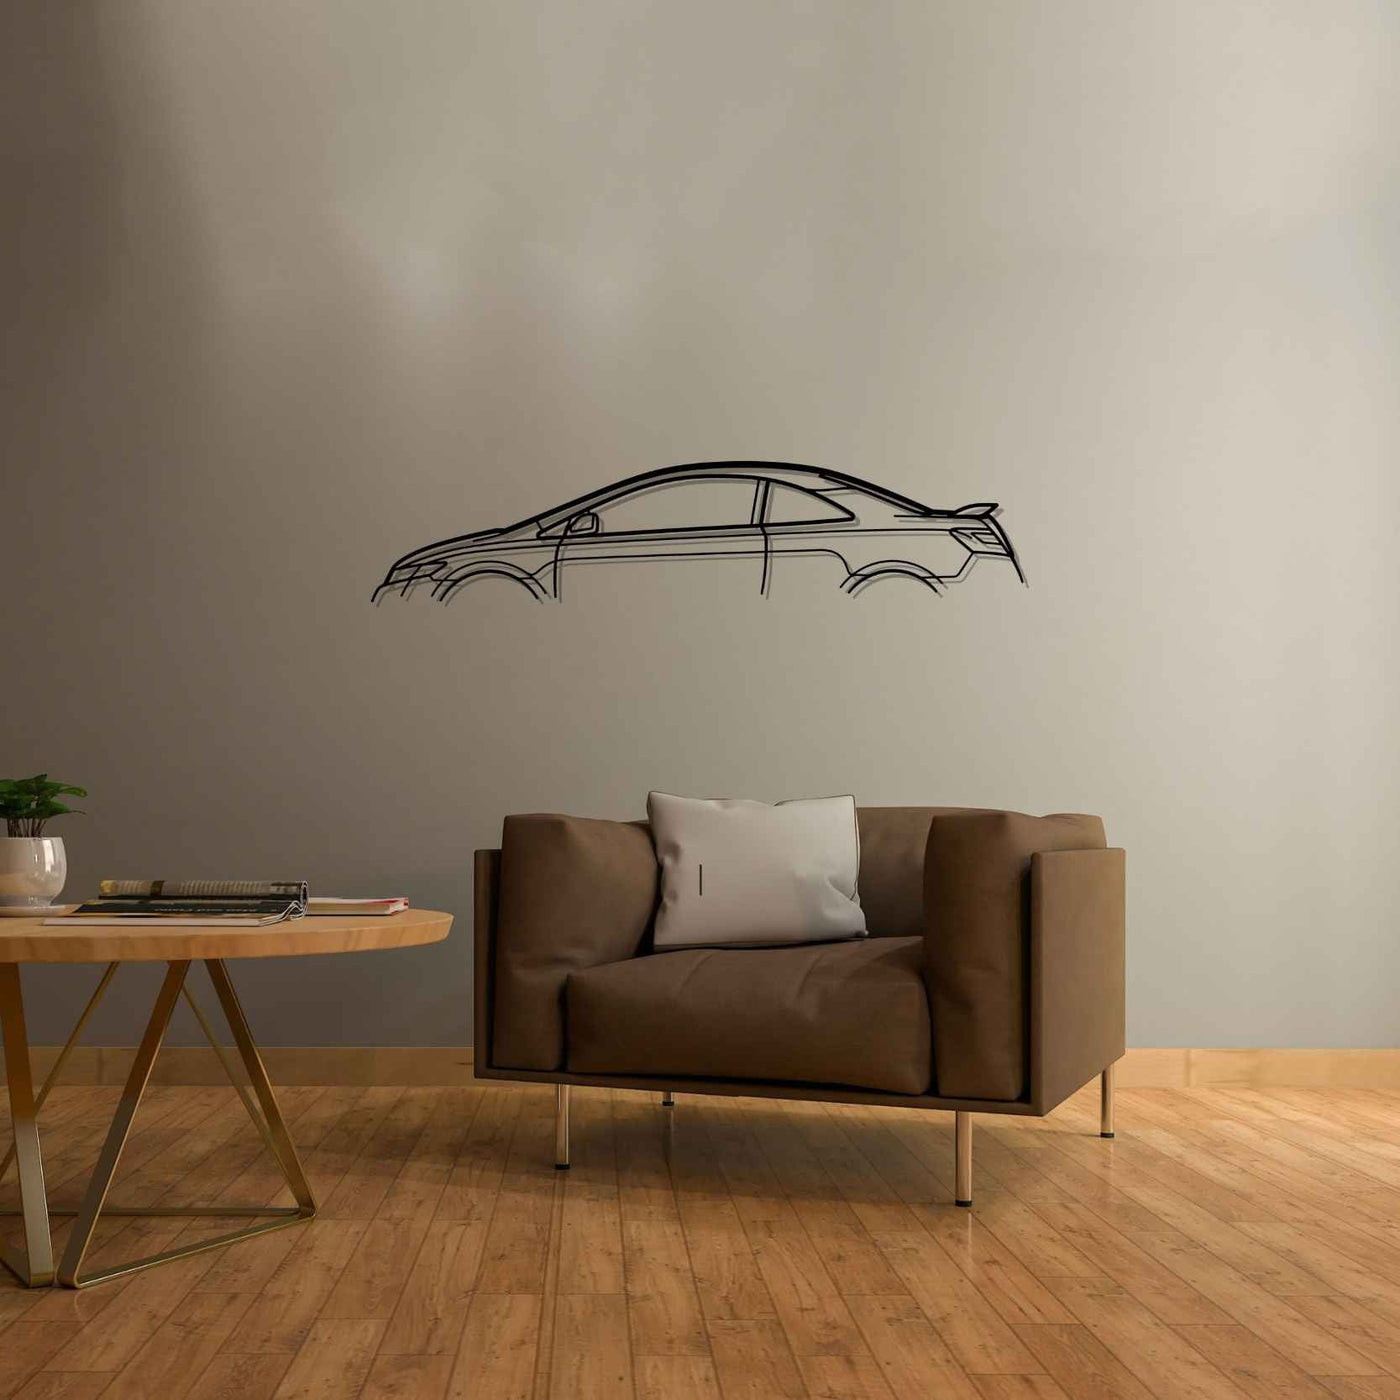 Civic Si Coupe 2006 Classic Silhouette Metal Wall Art